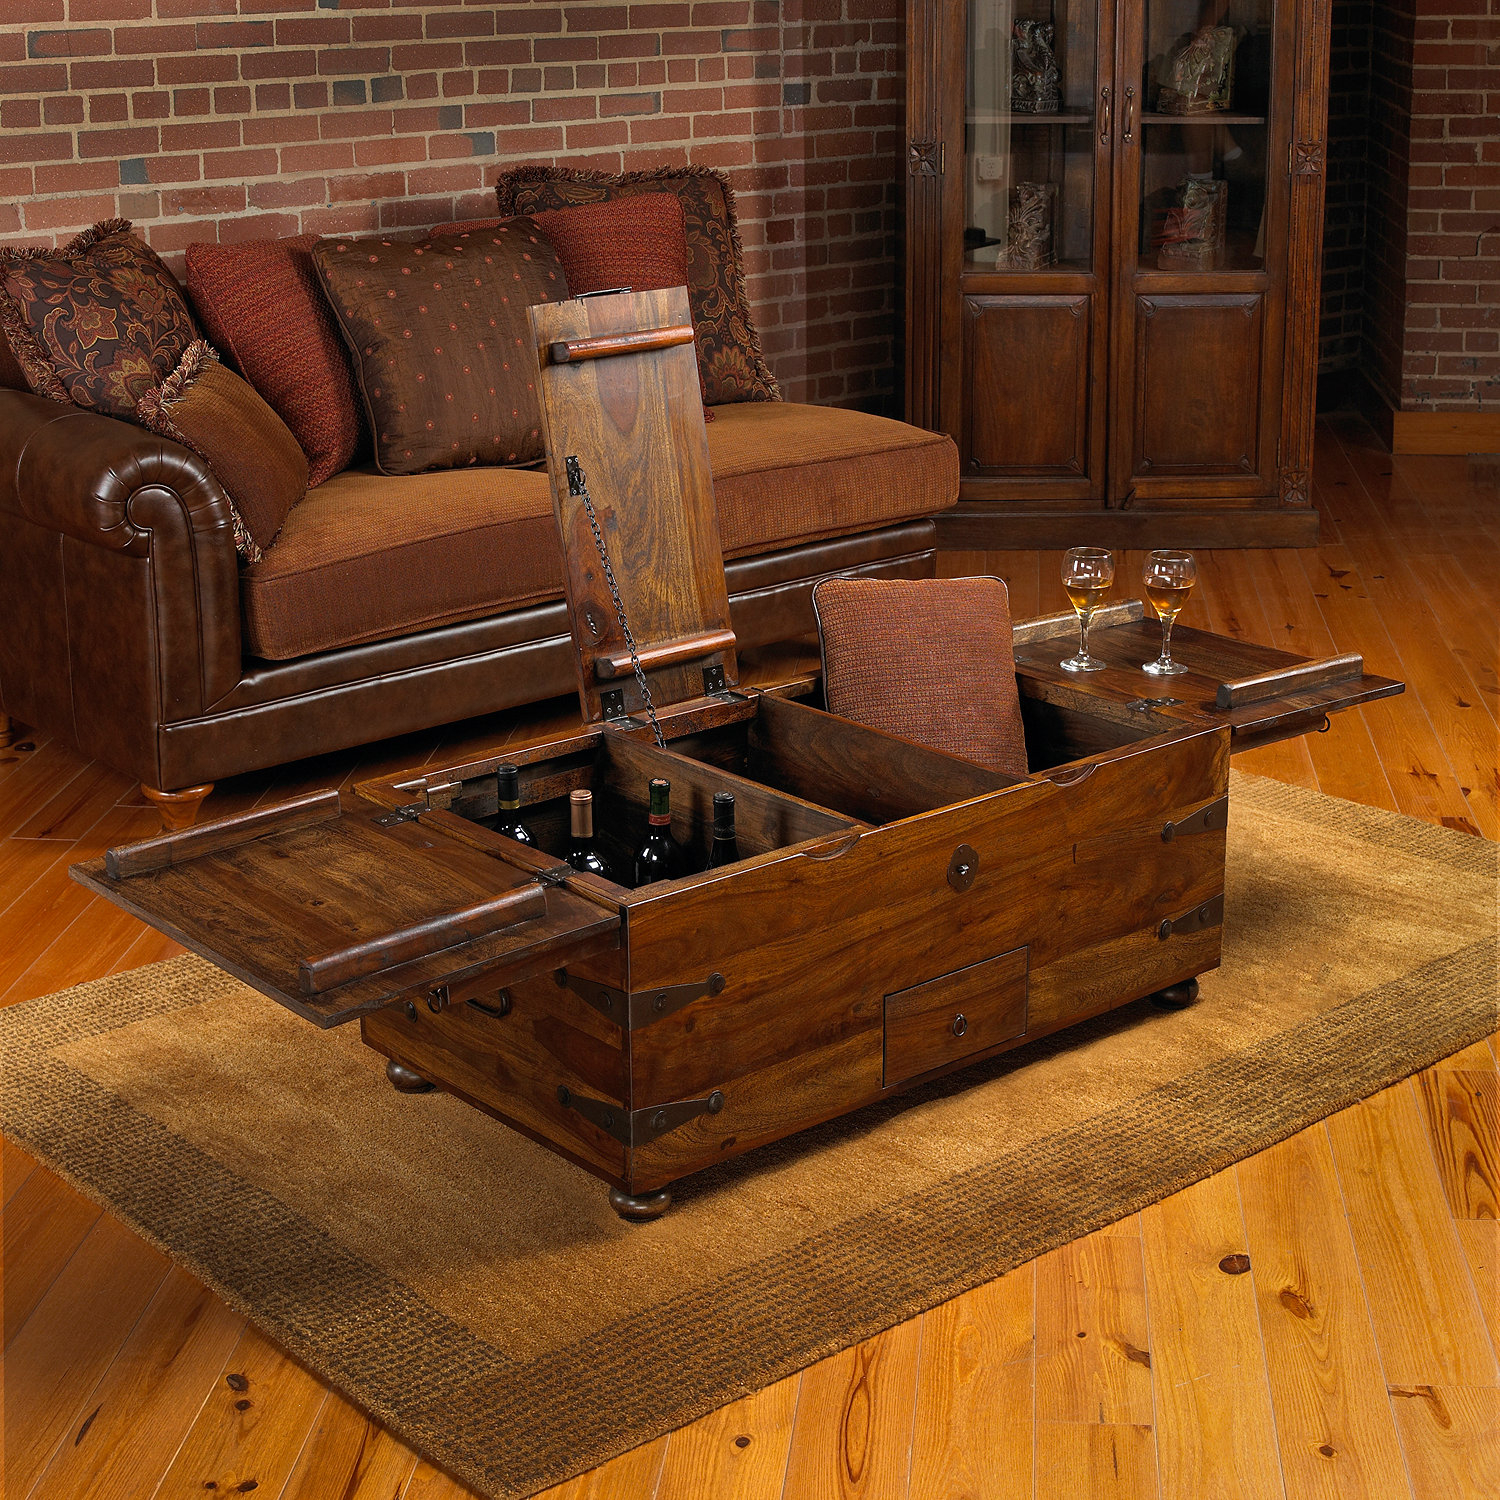 Thakat Bar Box Trunk Coffee Table Wine Enthusiast for size 1500 X 1500